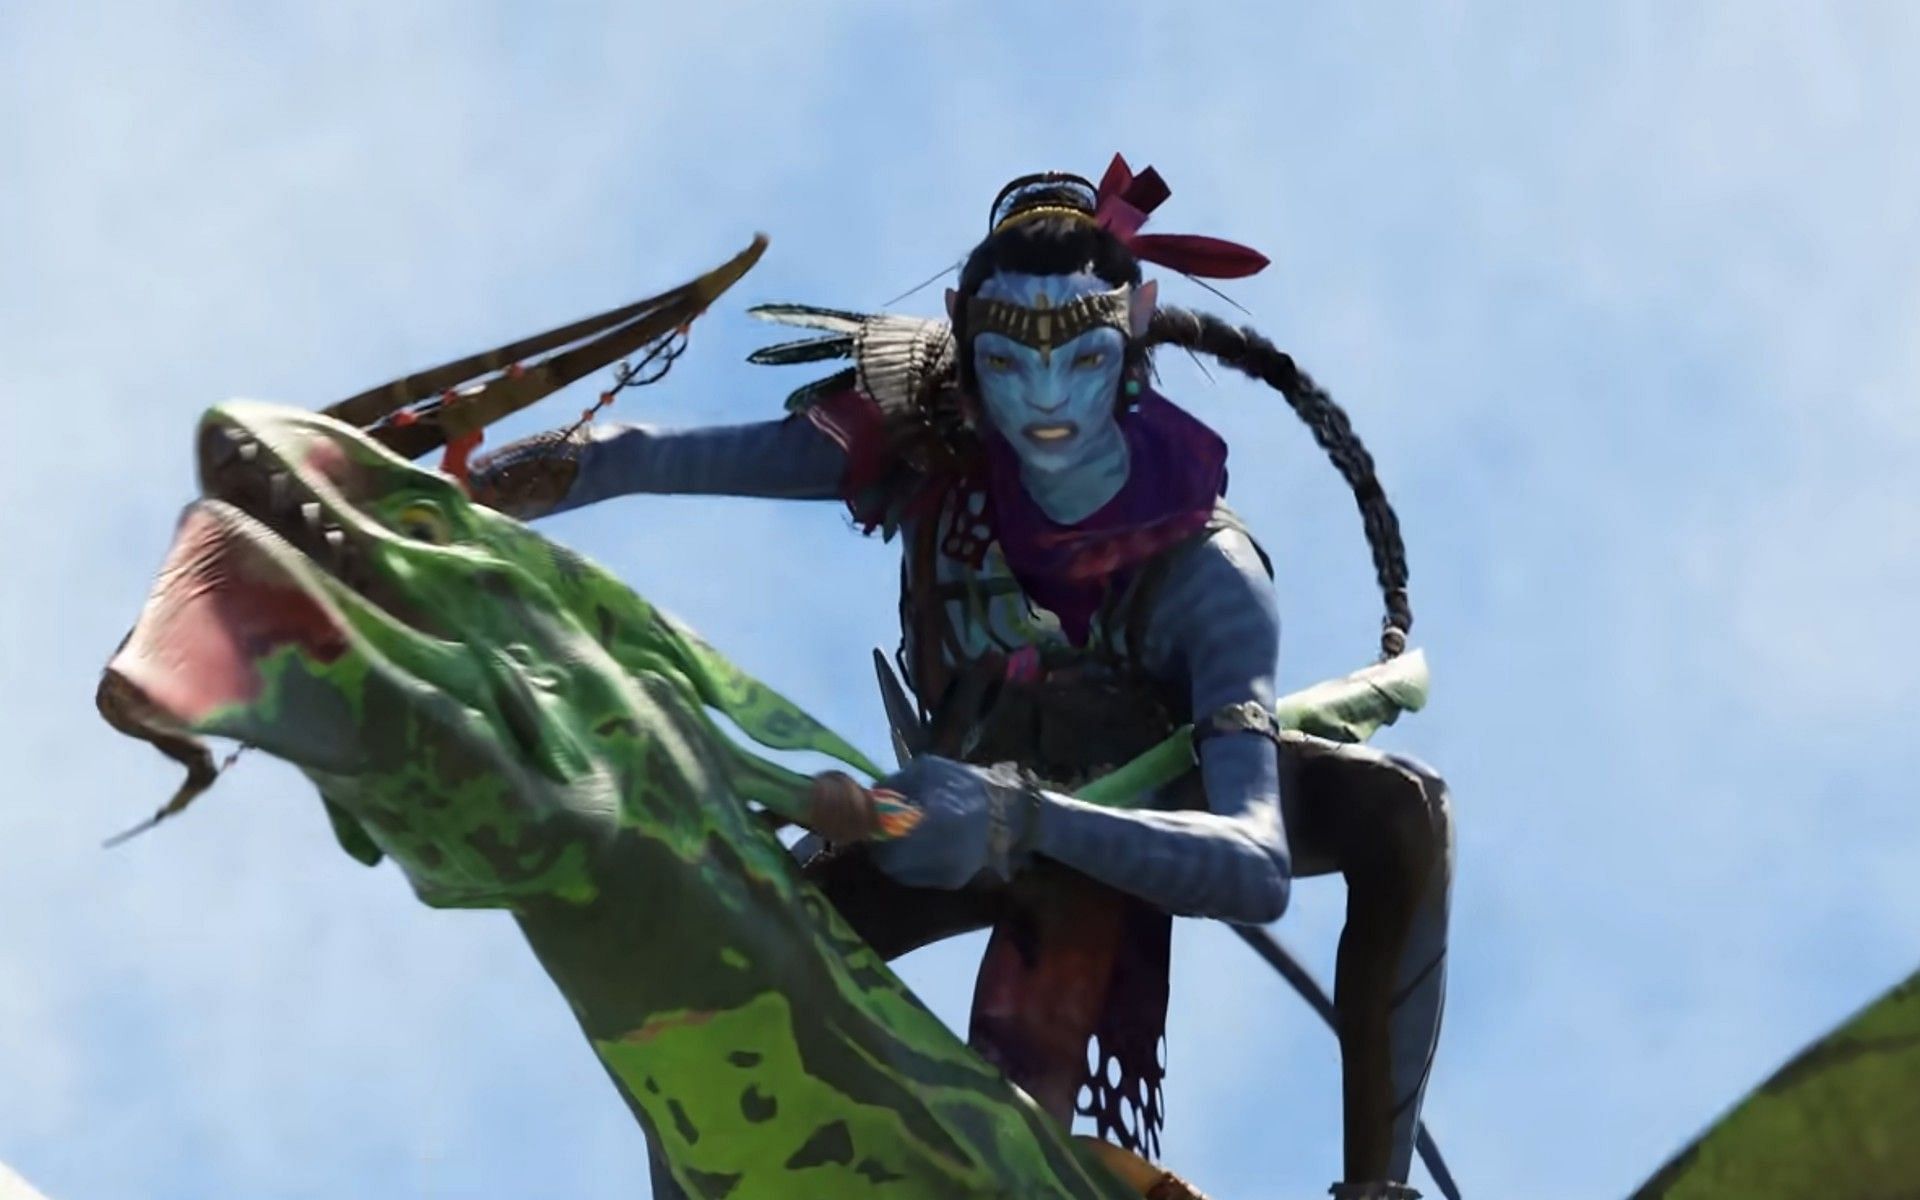 Avatar: Frontiers of Pandora will throw players into a new conflict (Image via Ubisoft)